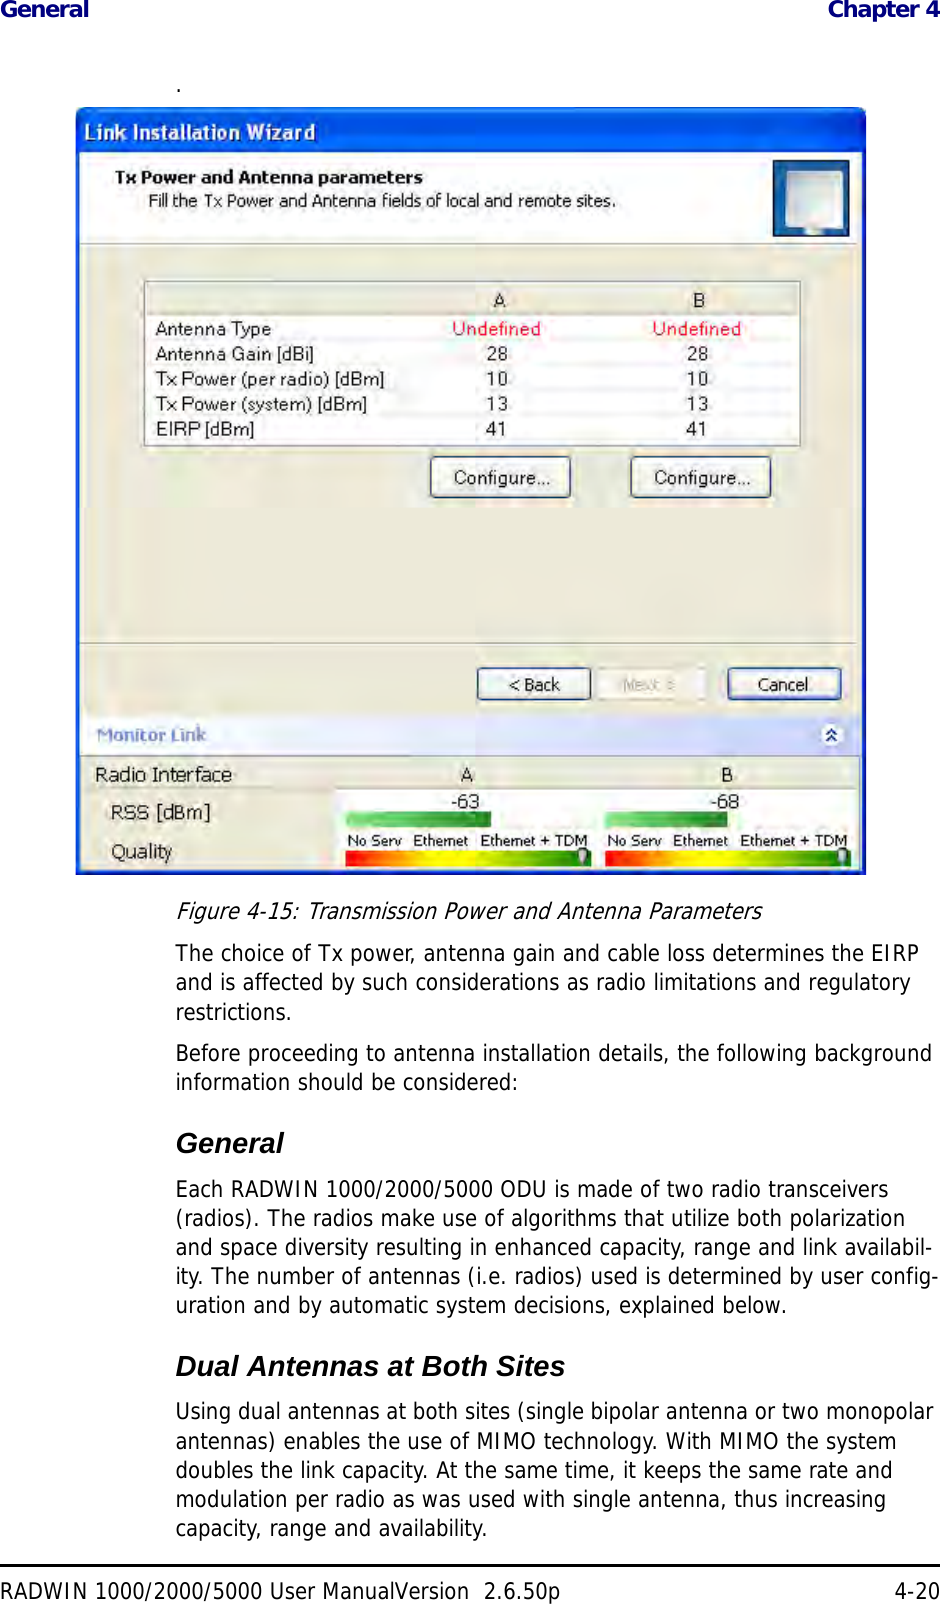 General  Chapter 4RADWIN 1000/2000/5000 User ManualVersion  2.6.50p 4-20.Figure 4-15: Transmission Power and Antenna ParametersThe choice of Tx power, antenna gain and cable loss determines the EIRP and is affected by such considerations as radio limitations and regulatory restrictions.Before proceeding to antenna installation details, the following background information should be considered:GeneralEach RADWIN 1000/2000/5000 ODU is made of two radio transceivers (radios). The radios make use of algorithms that utilize both polarization and space diversity resulting in enhanced capacity, range and link availabil-ity. The number of antennas (i.e. radios) used is determined by user config-uration and by automatic system decisions, explained below. Dual Antennas at Both SitesUsing dual antennas at both sites (single bipolar antenna or two monopolar antennas) enables the use of MIMO technology. With MIMO the system doubles the link capacity. At the same time, it keeps the same rate and modulation per radio as was used with single antenna, thus increasing capacity, range and availability.